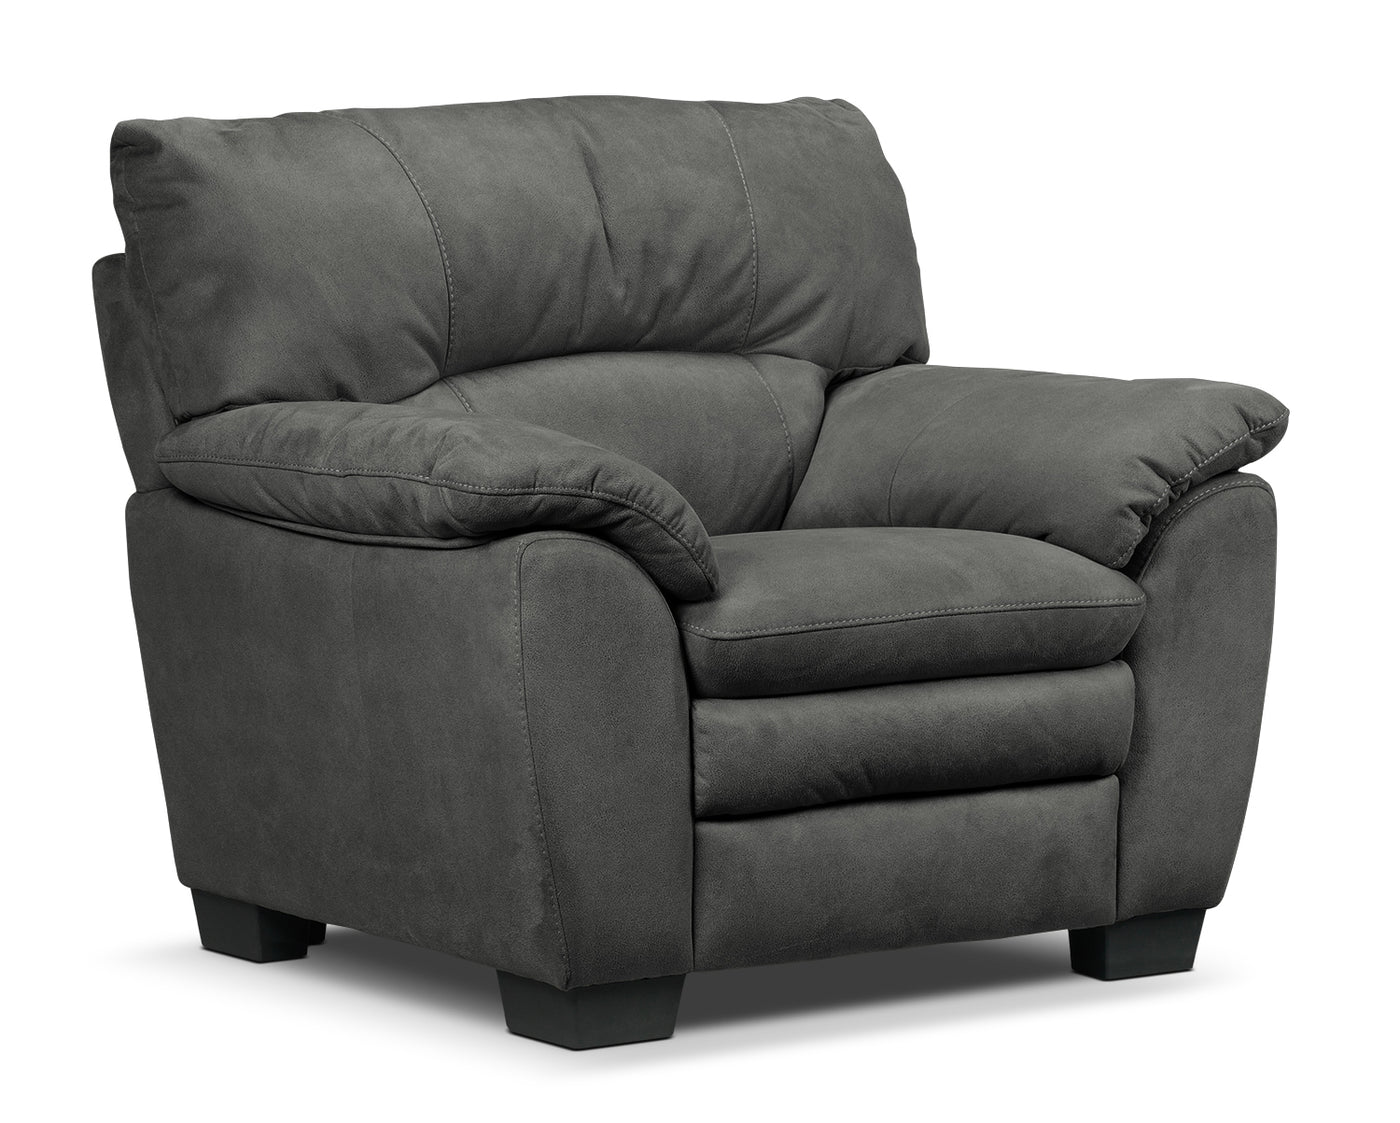 Kelleher Sofa, Loveseat and Chair Set - Charcoal